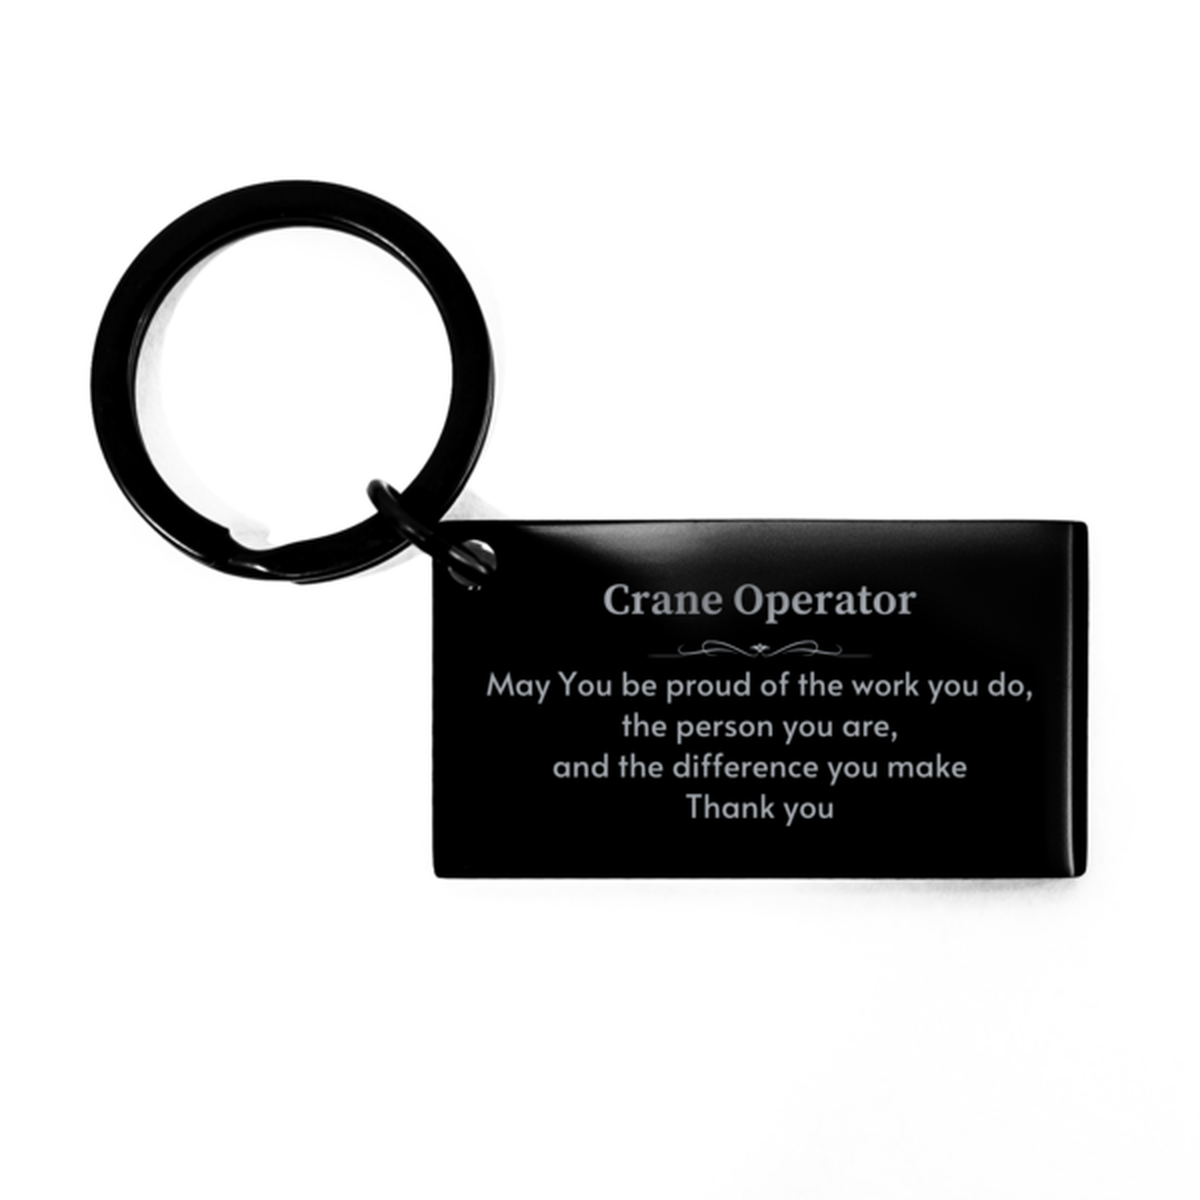 Heartwarming Keychain Retirement Coworkers Gifts for Crane Operator, Flight Attendant May You be proud of the work you do, the person you are Gifts for Boss Men Women Friends